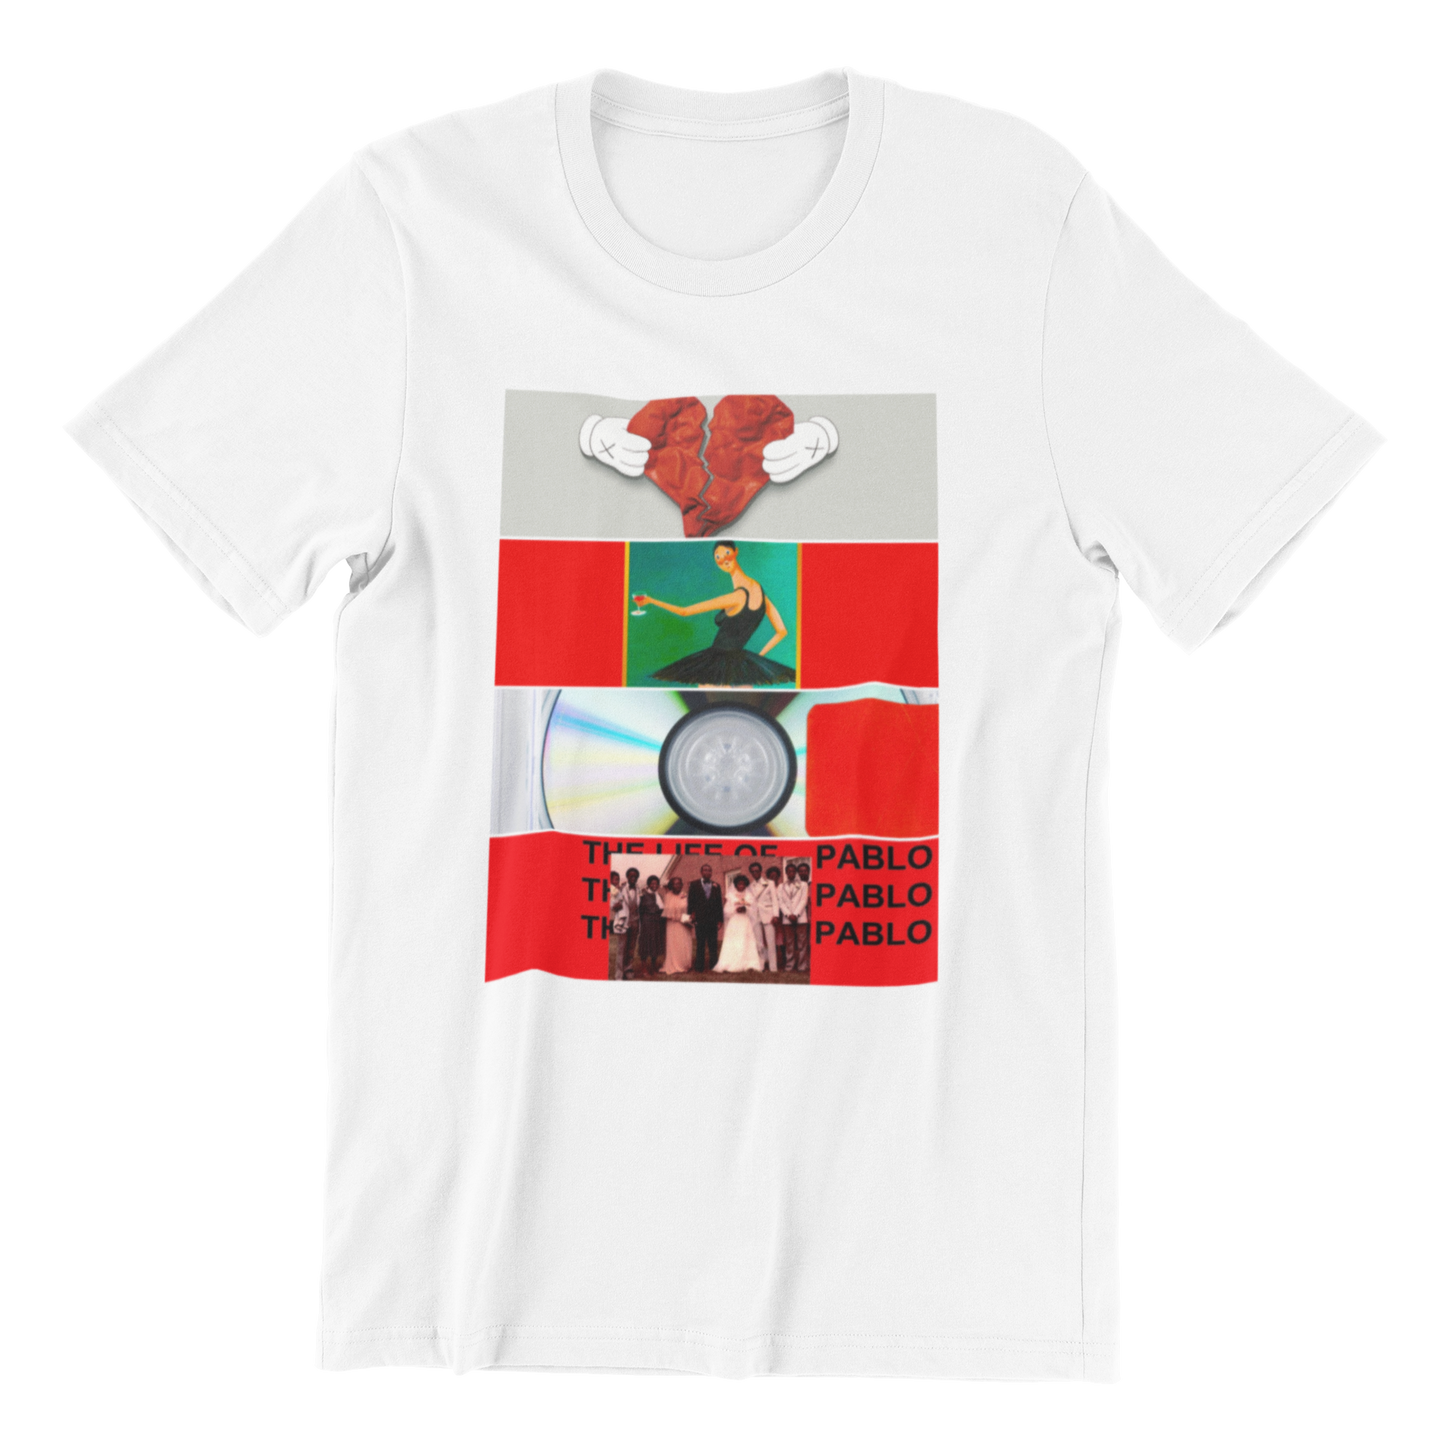 Kanye West, Version 2 (Album Cover Tee)